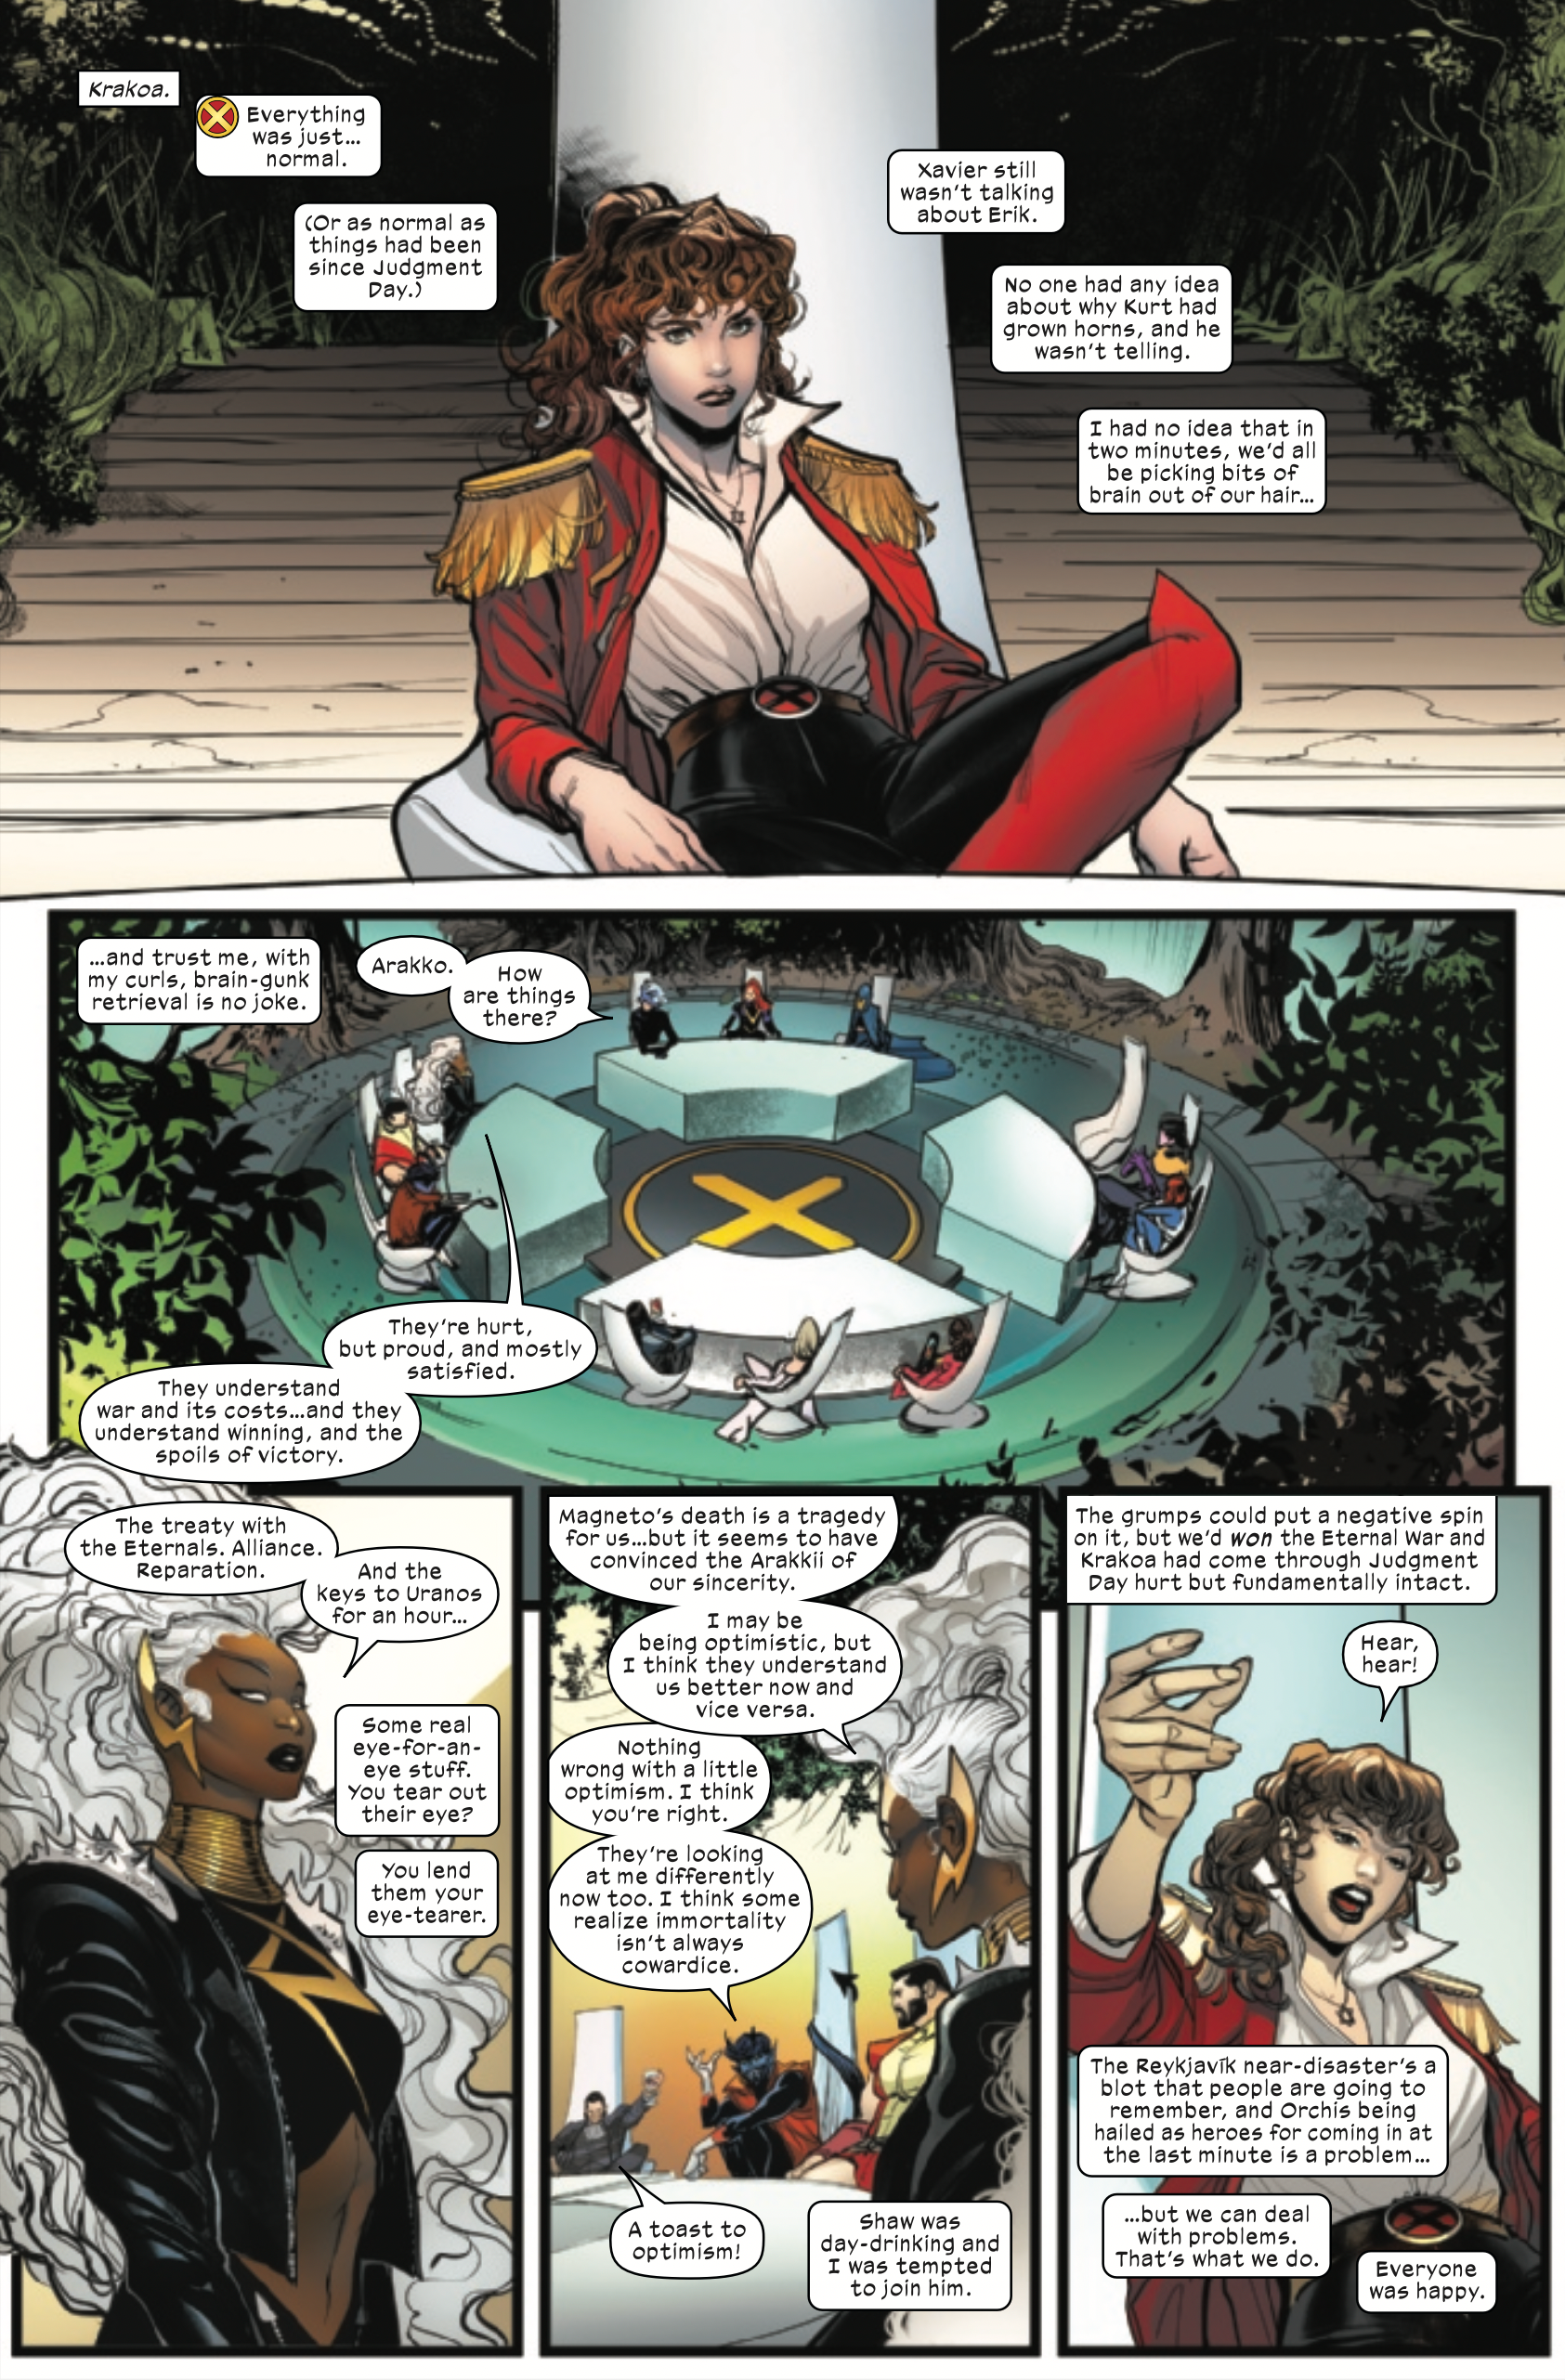 Kitty Pryde on the X-Men's Quiet Council